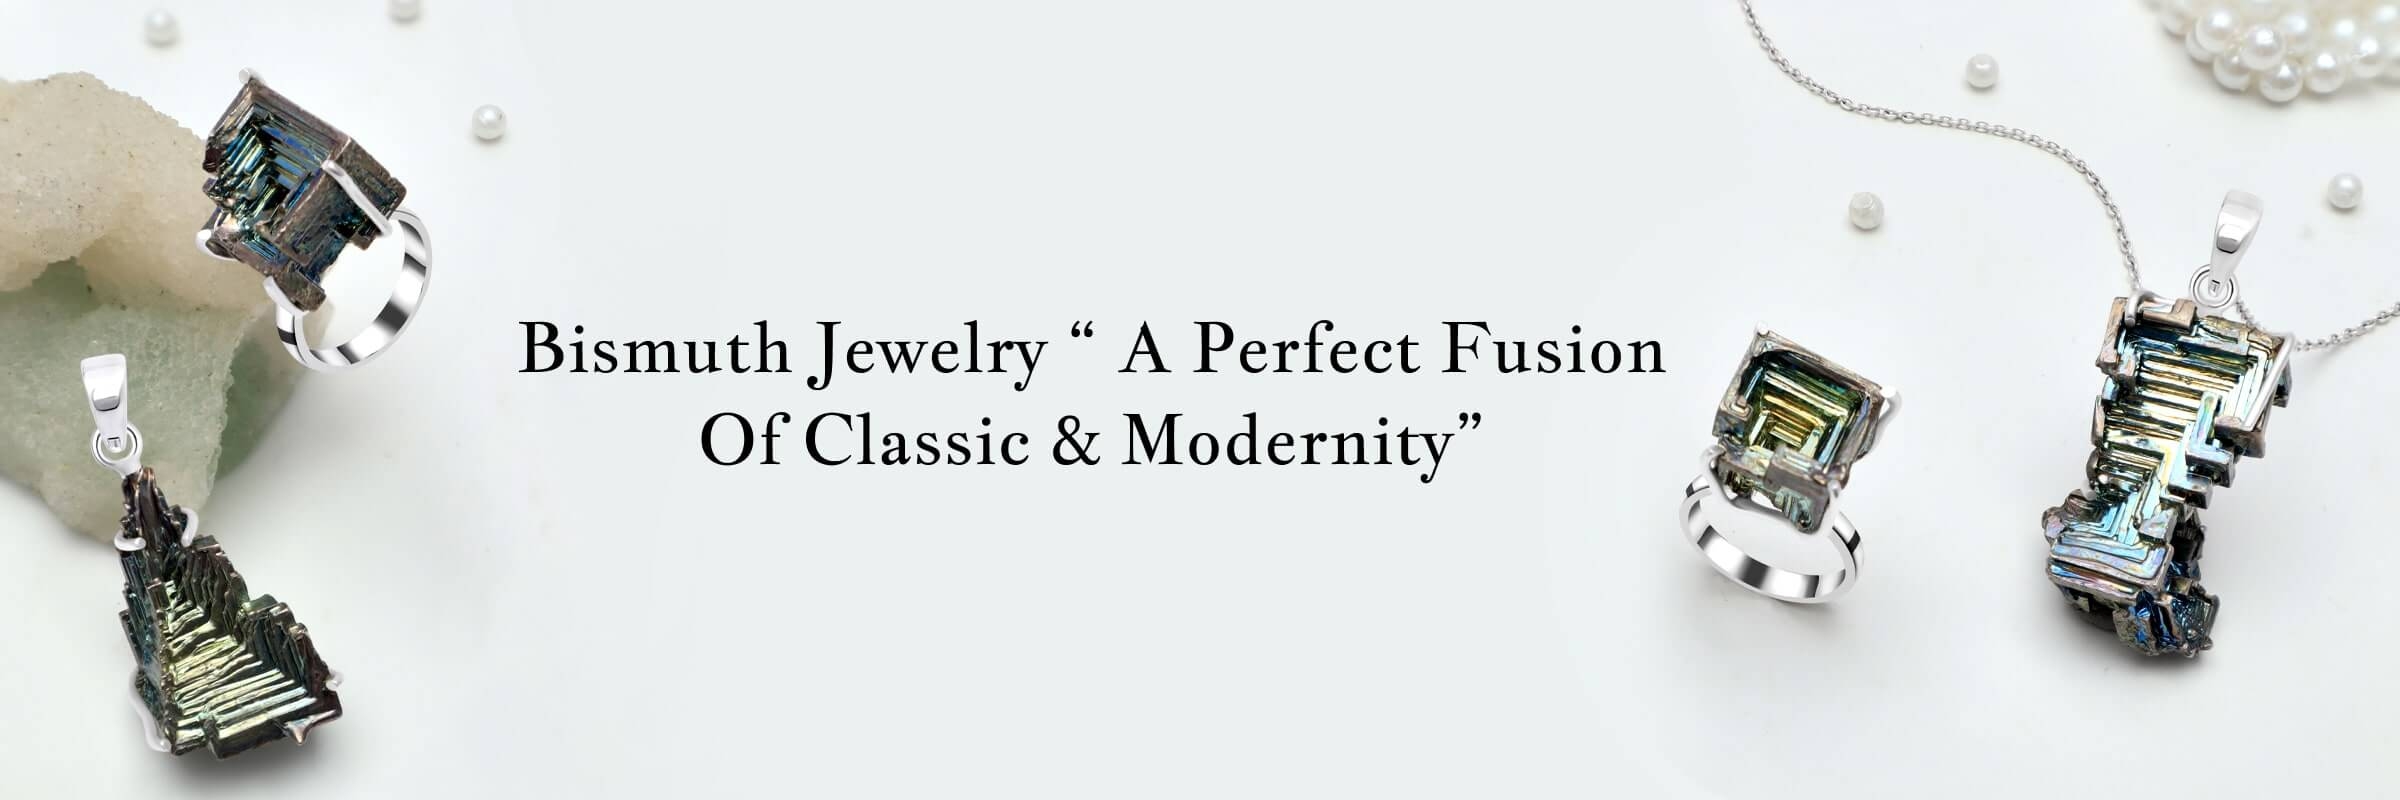 Elegant Care To Live Long - Bismuth Jewelry